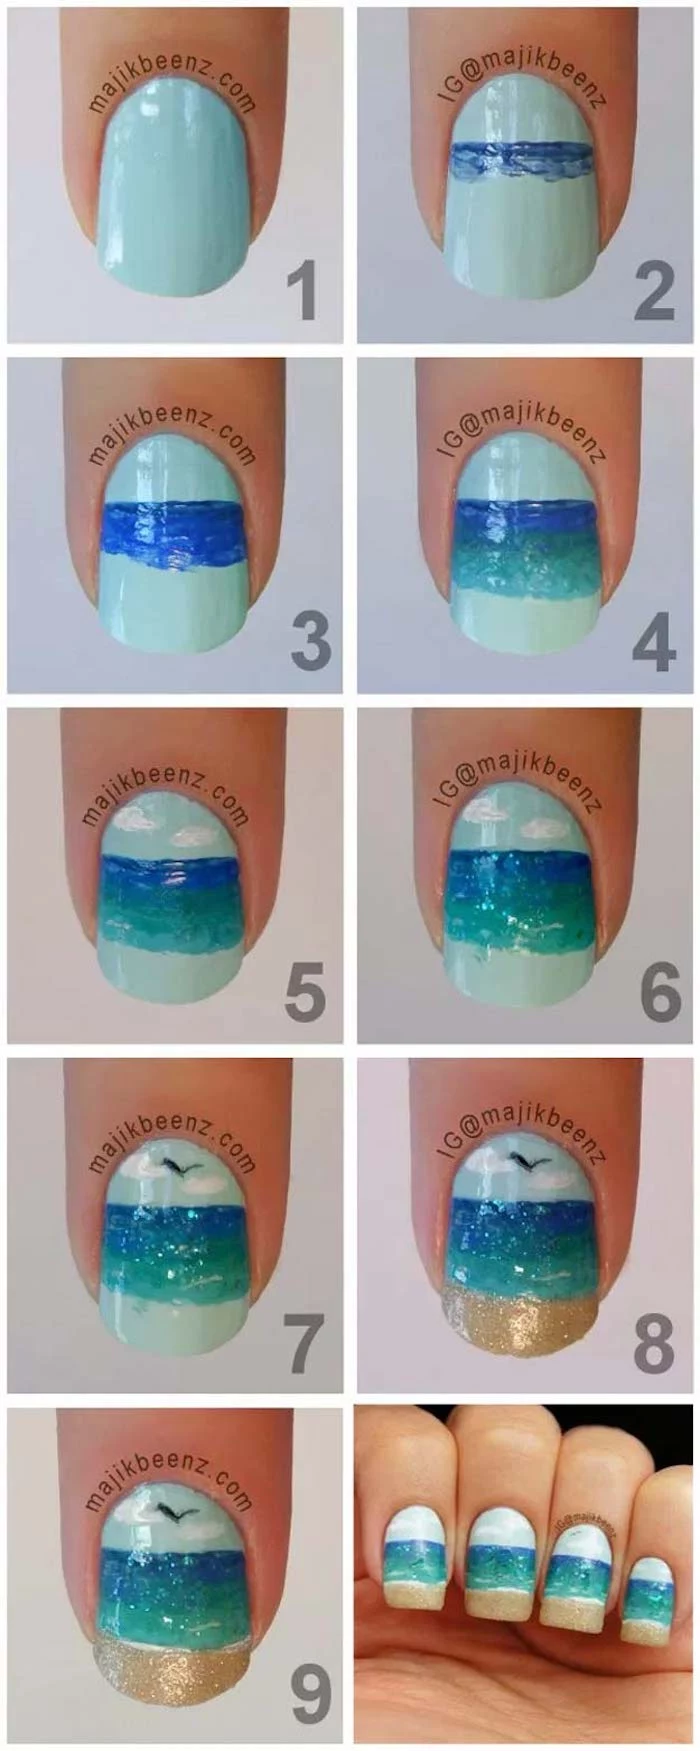 blue and gold ocean landscape decoration cute acrylic nail ideas step by step diy tutorial photo collage